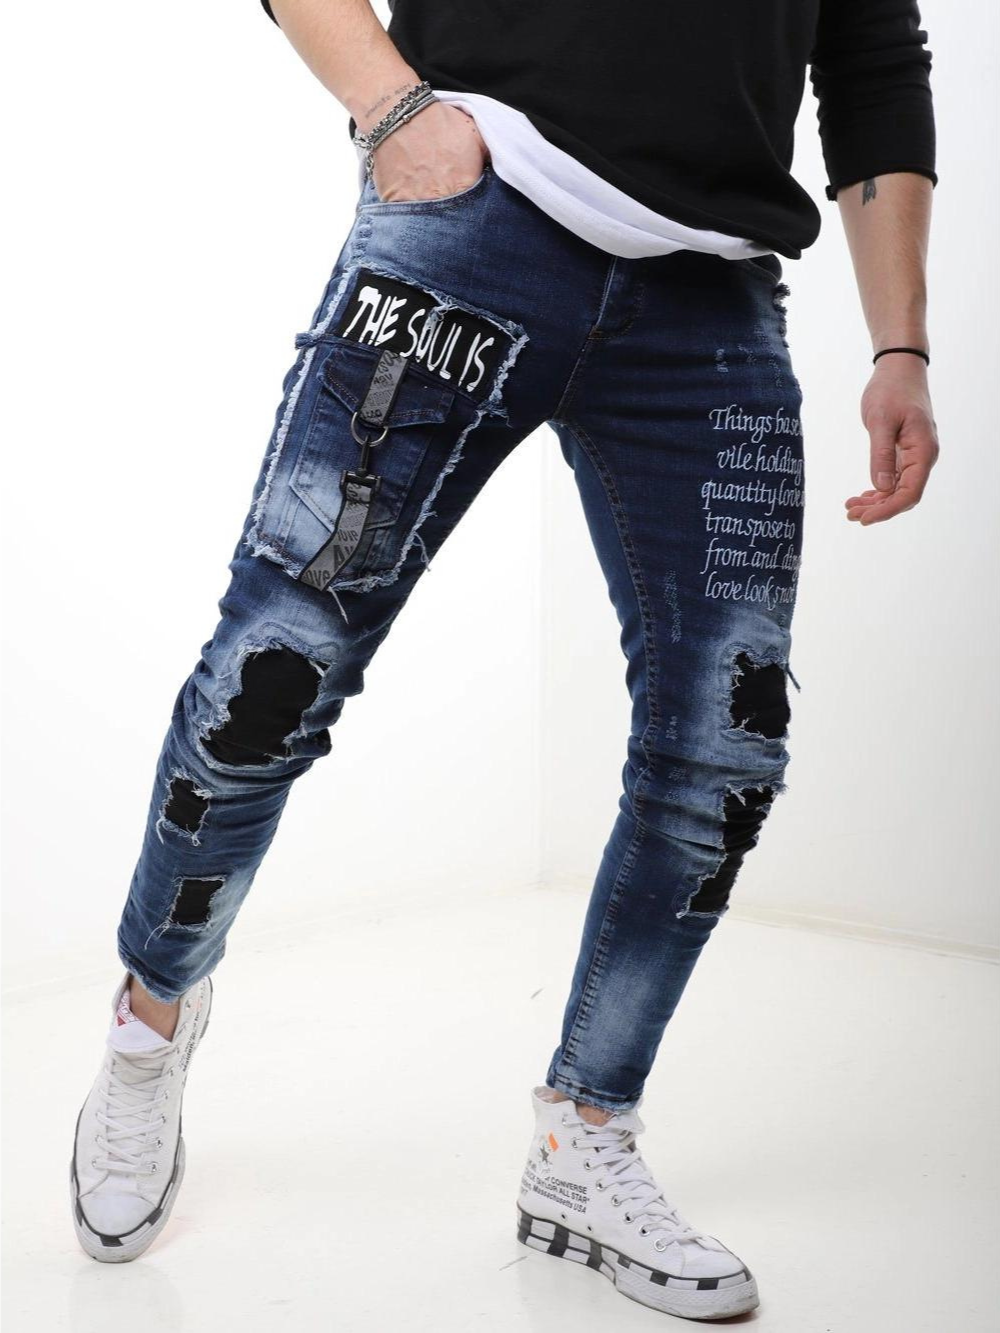 A man wearing ripped jeans and a white BLUE SOUL t - shirt.